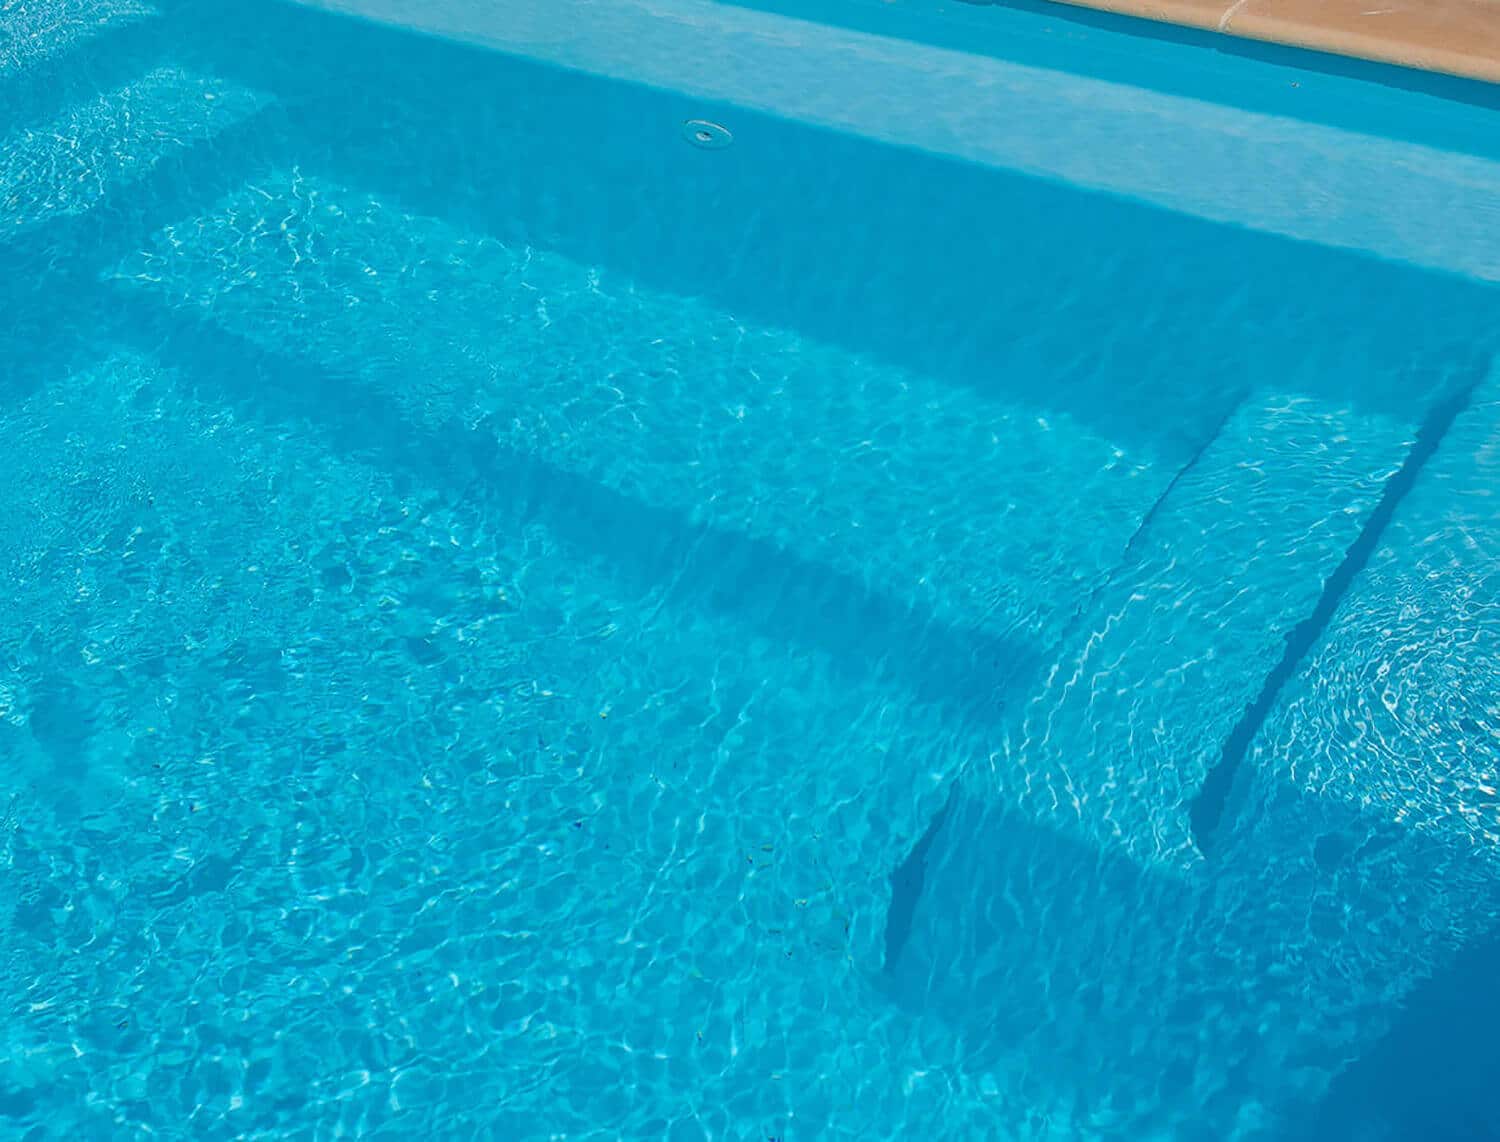 Installing a pool shell: Focus on the steps! Aboral unveils